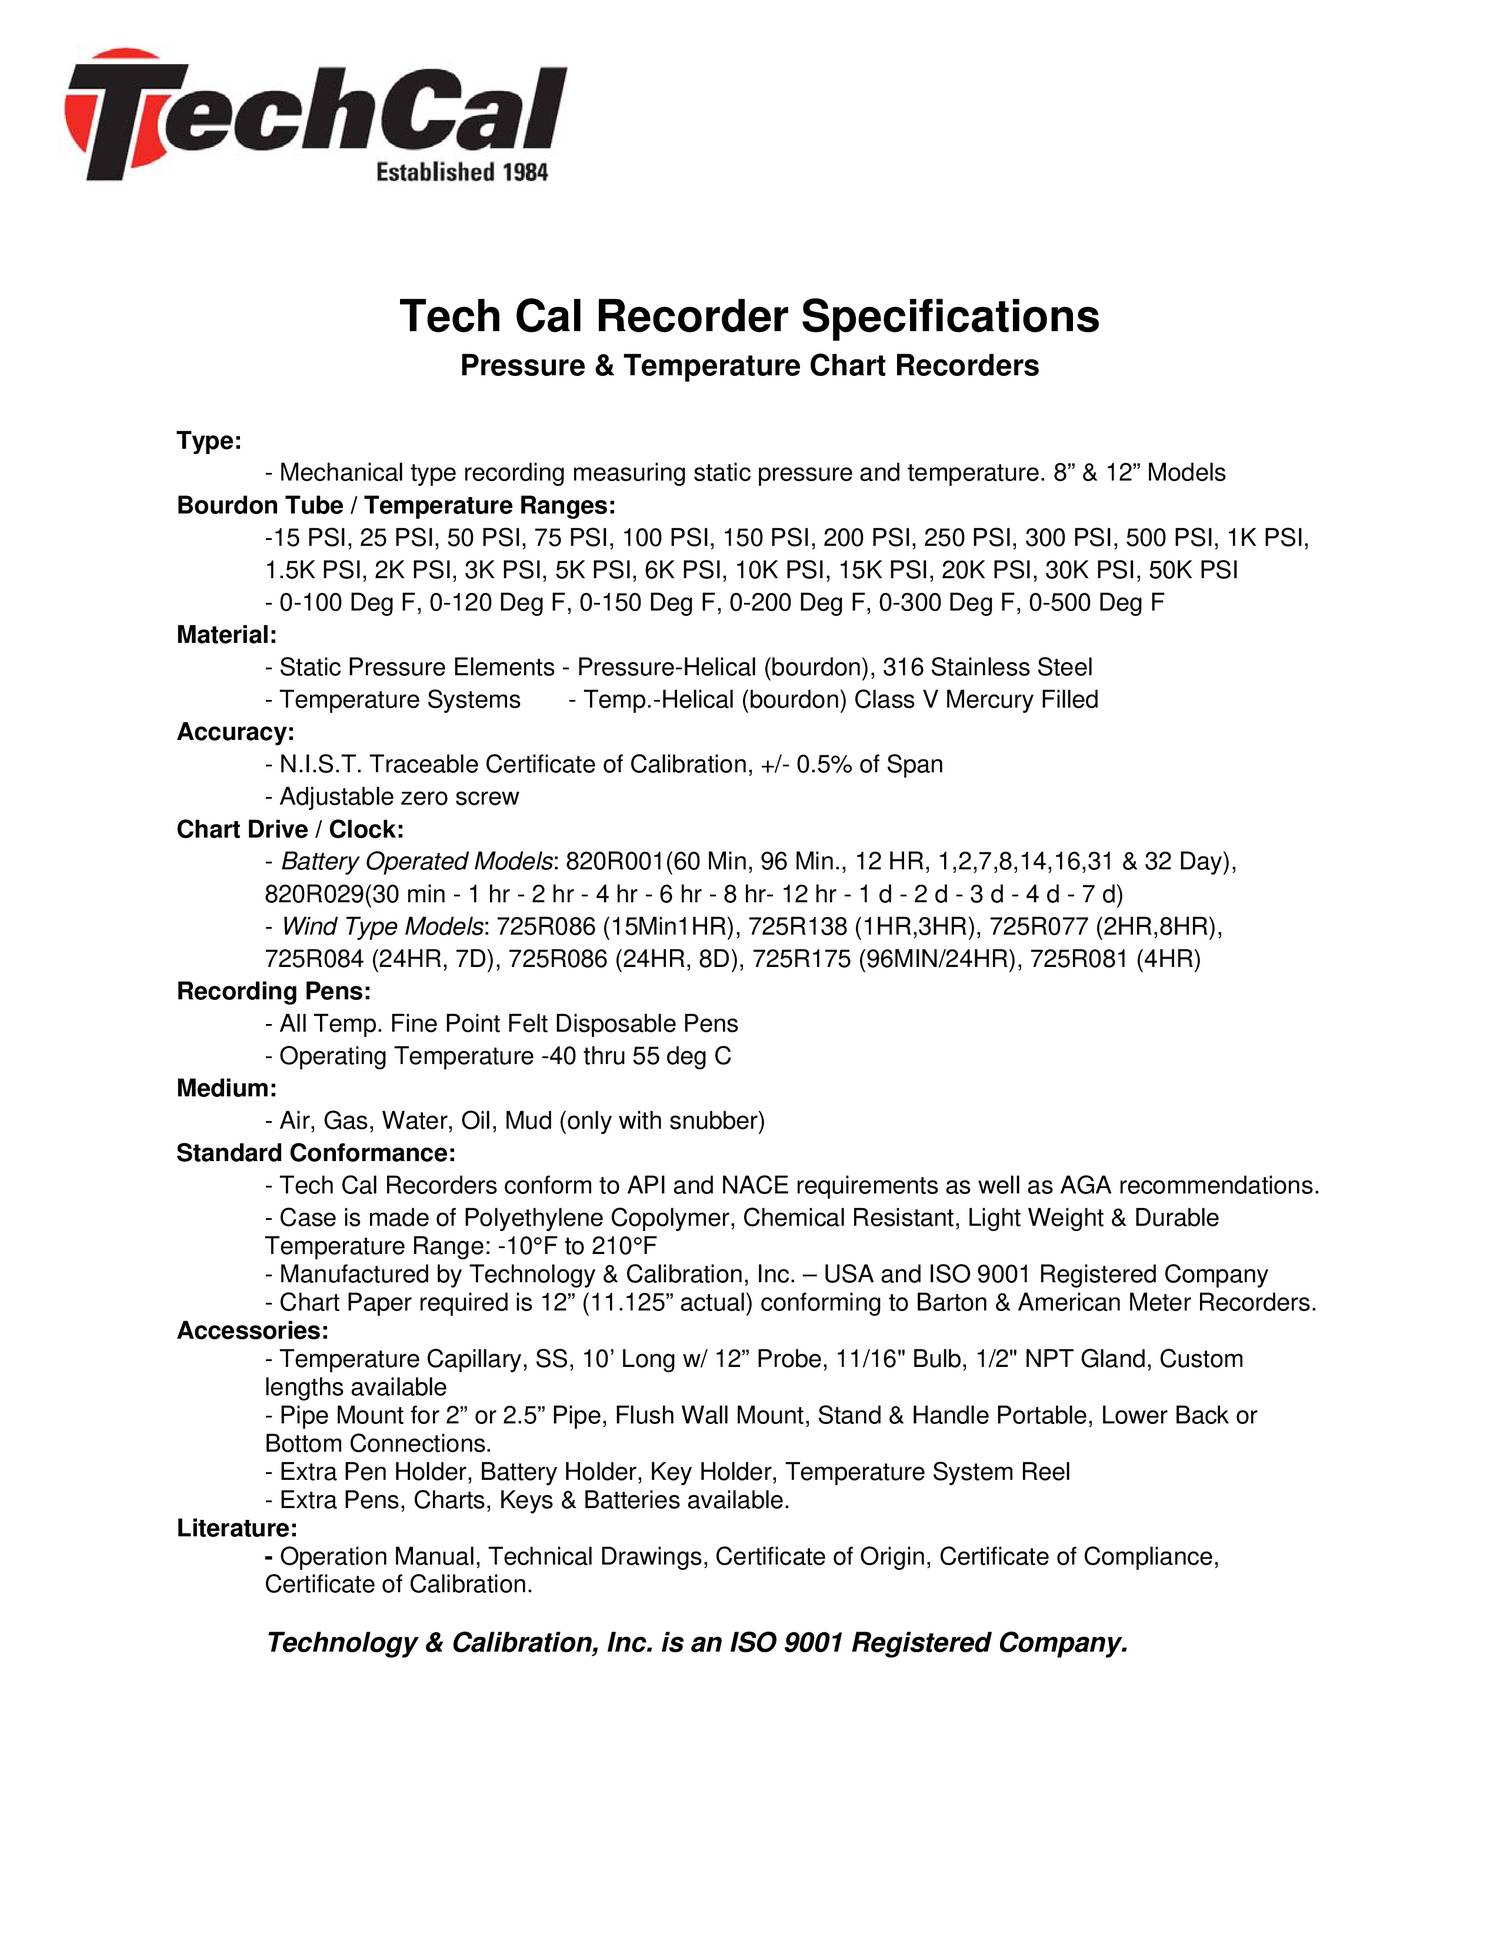 Tech Cal Recorder Specifications.pdf | DocDroid